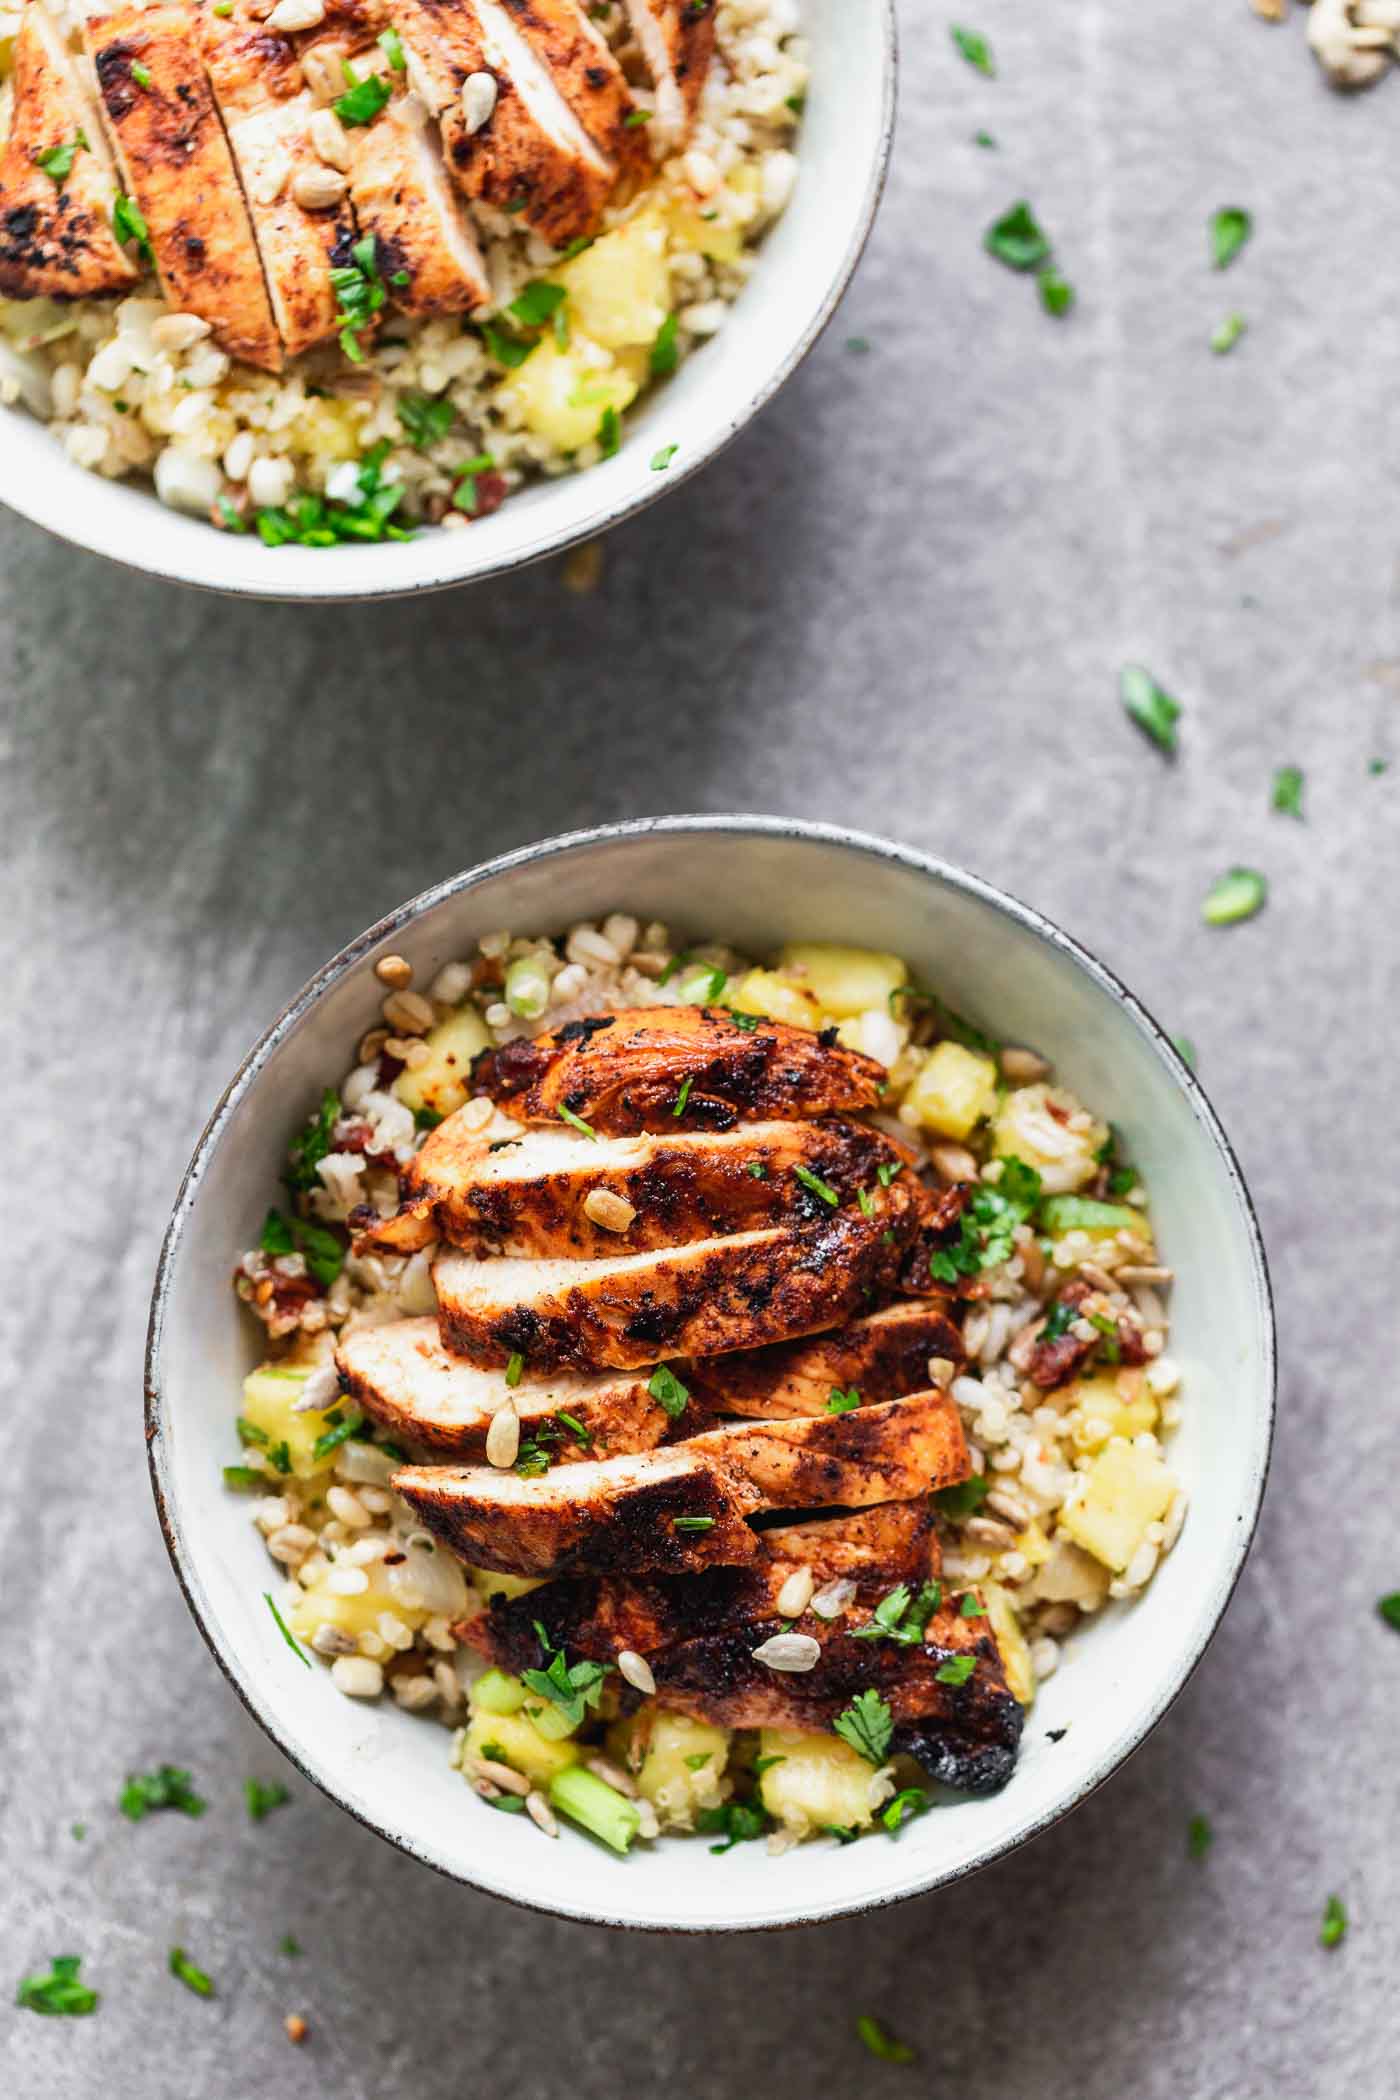 Chipotle Chicken and Pineapple Barley Bowls